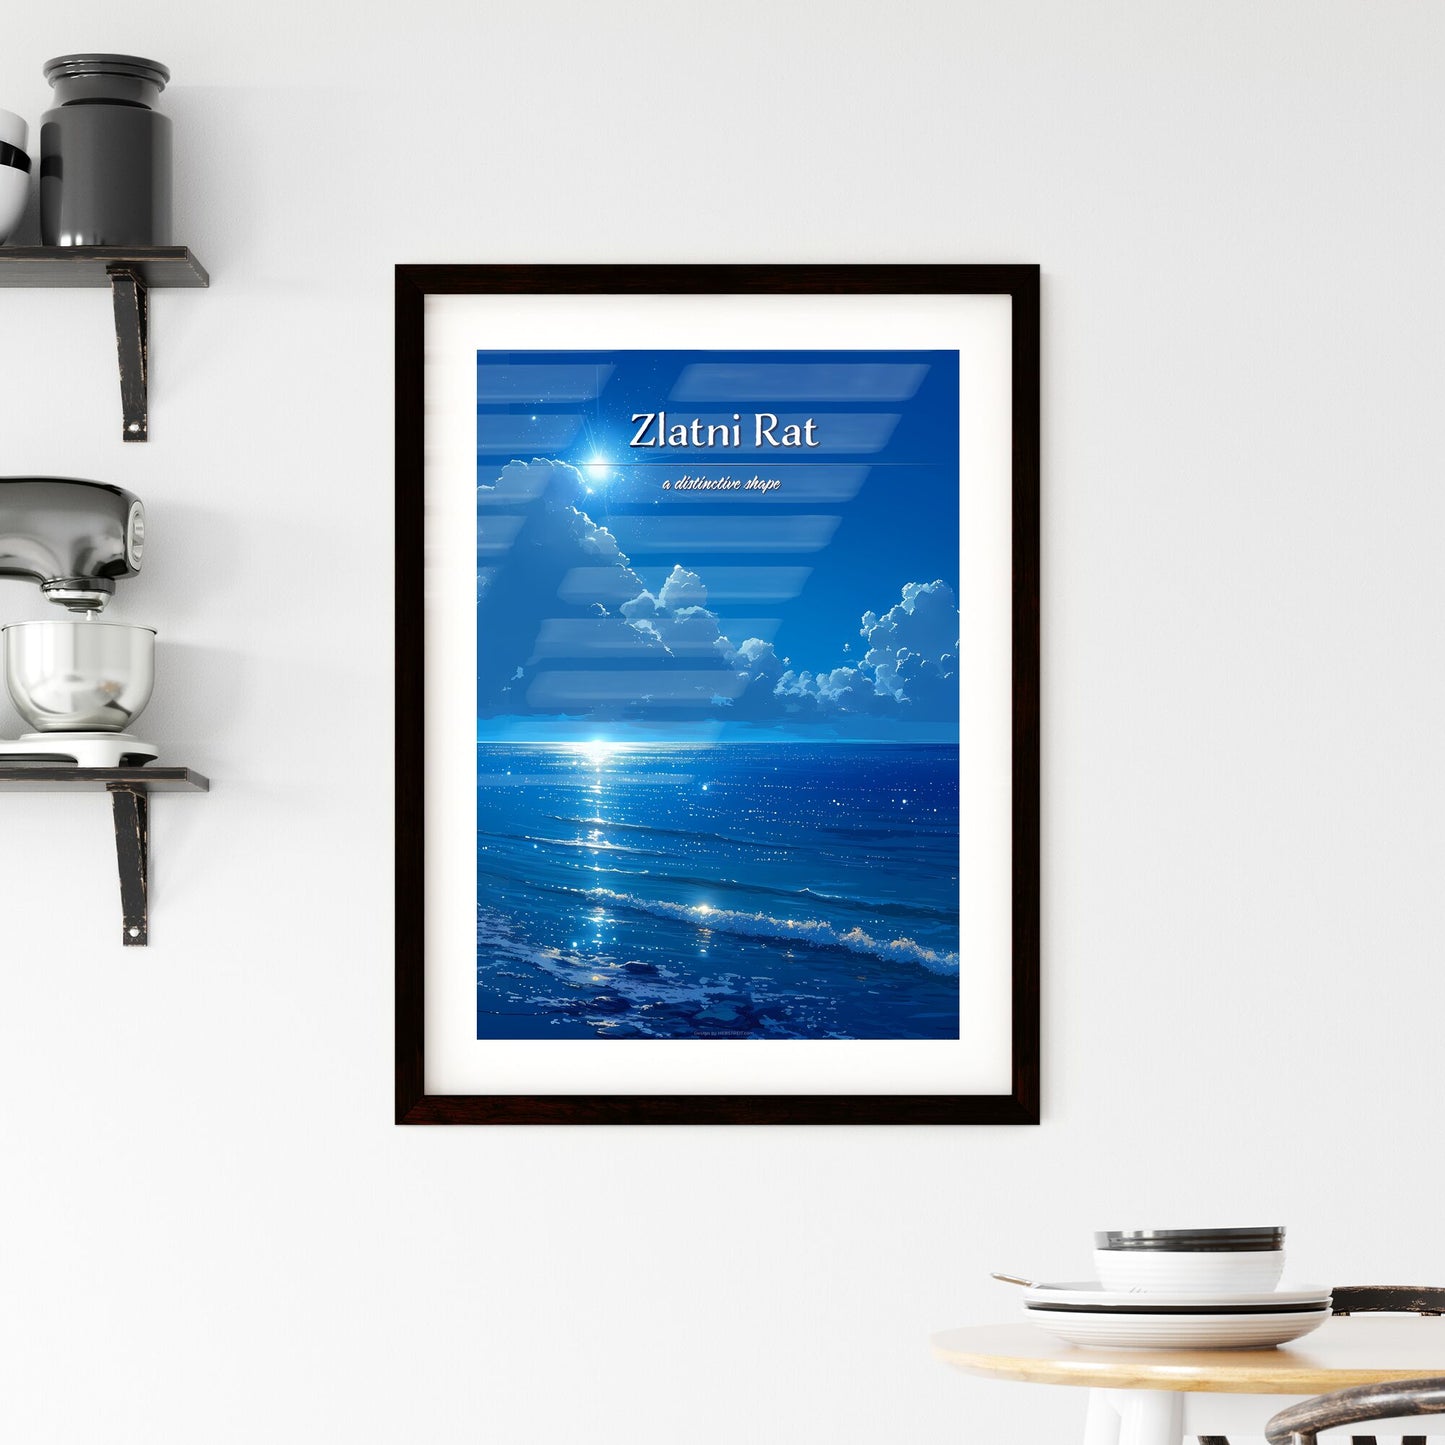 Zlatni Rat (Golden Horn Beach) - Art print of a blue sky with clouds and a body of water Default Title